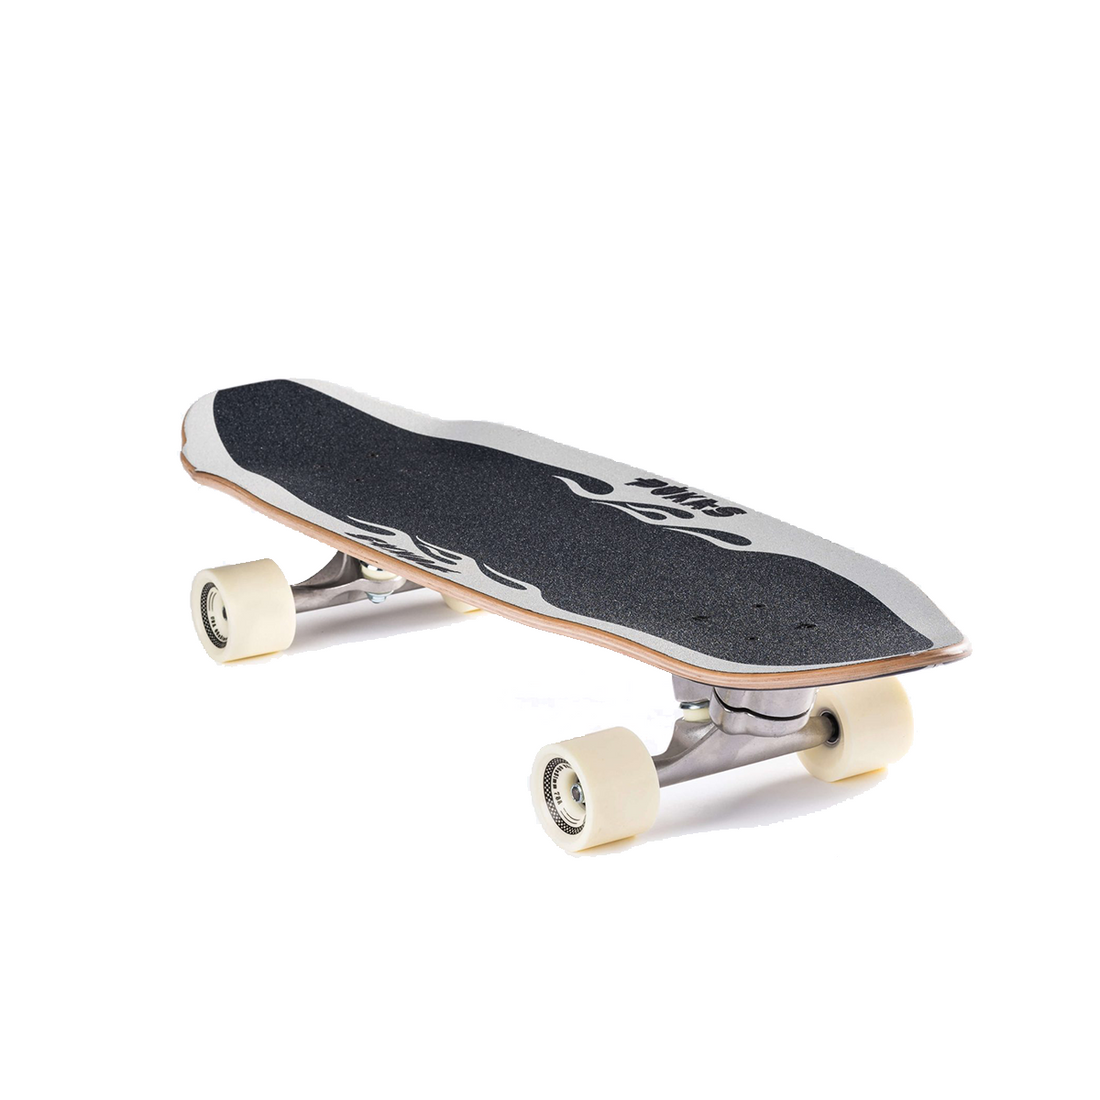 Yow X Pukas Flame 33" Surfskate Complete 2023